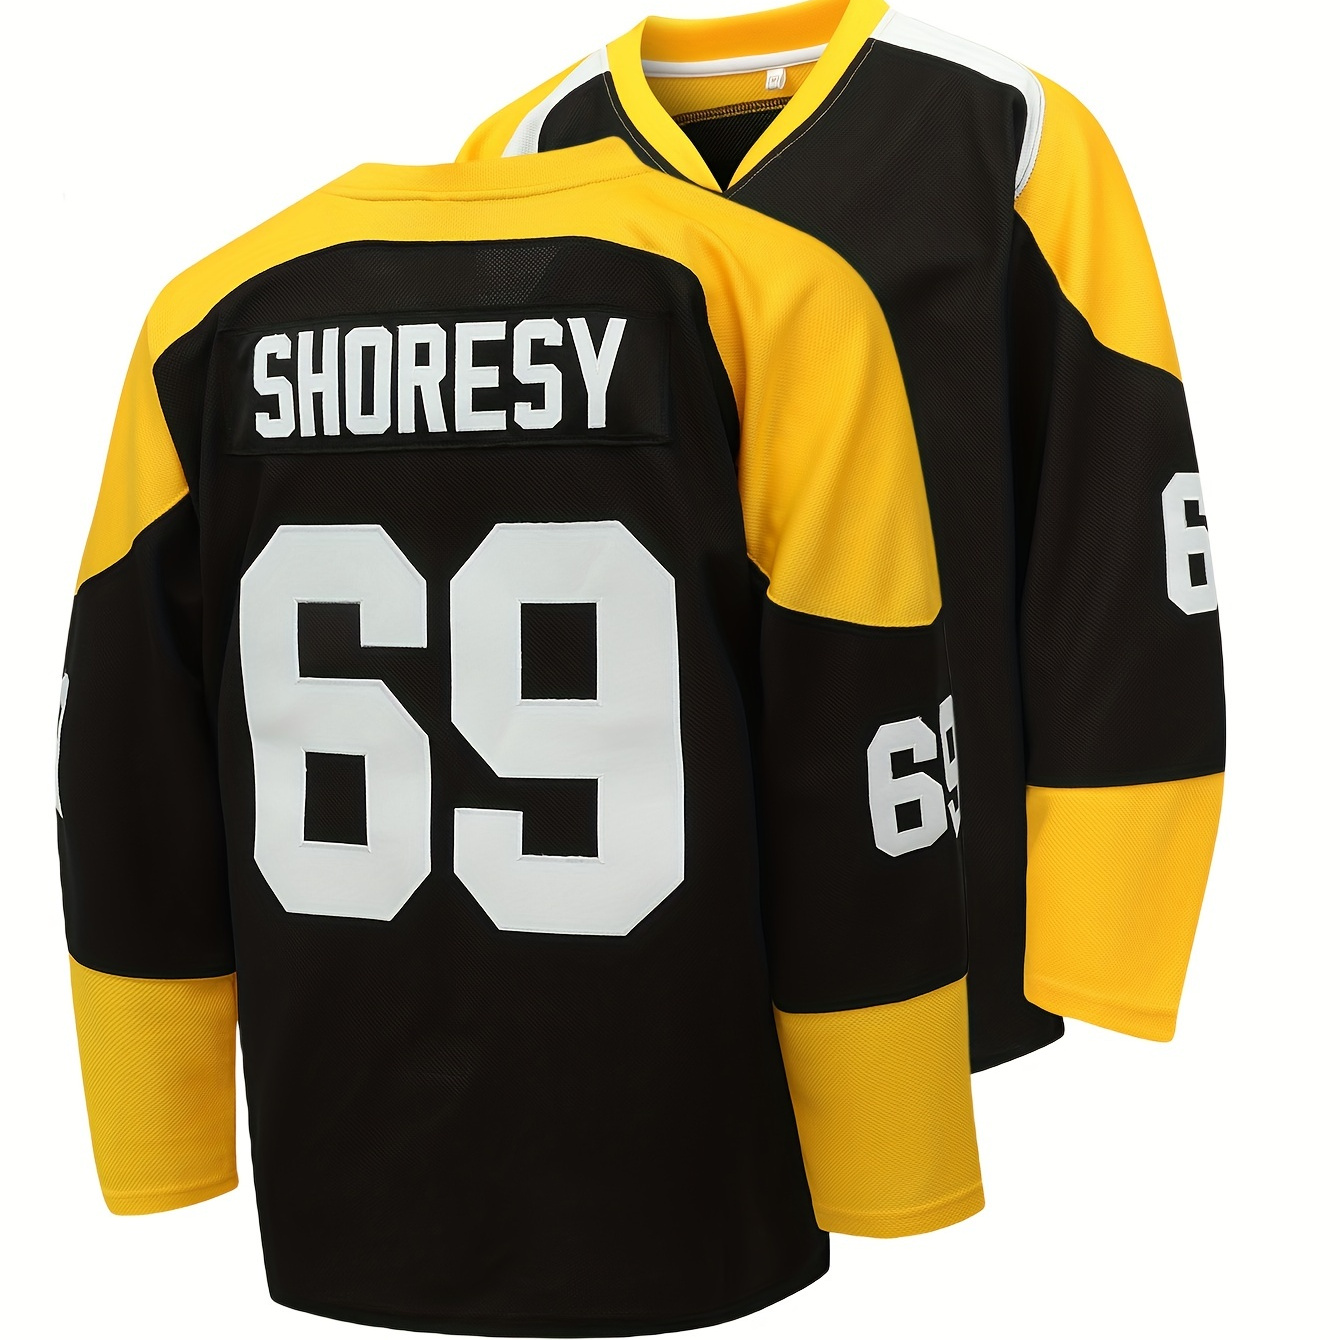 

Men's Number 69 Embroidery Ice Hockey Jersey, Vintage V Neck Long Sleeve Uniform Hockey Shirt For Training Competition